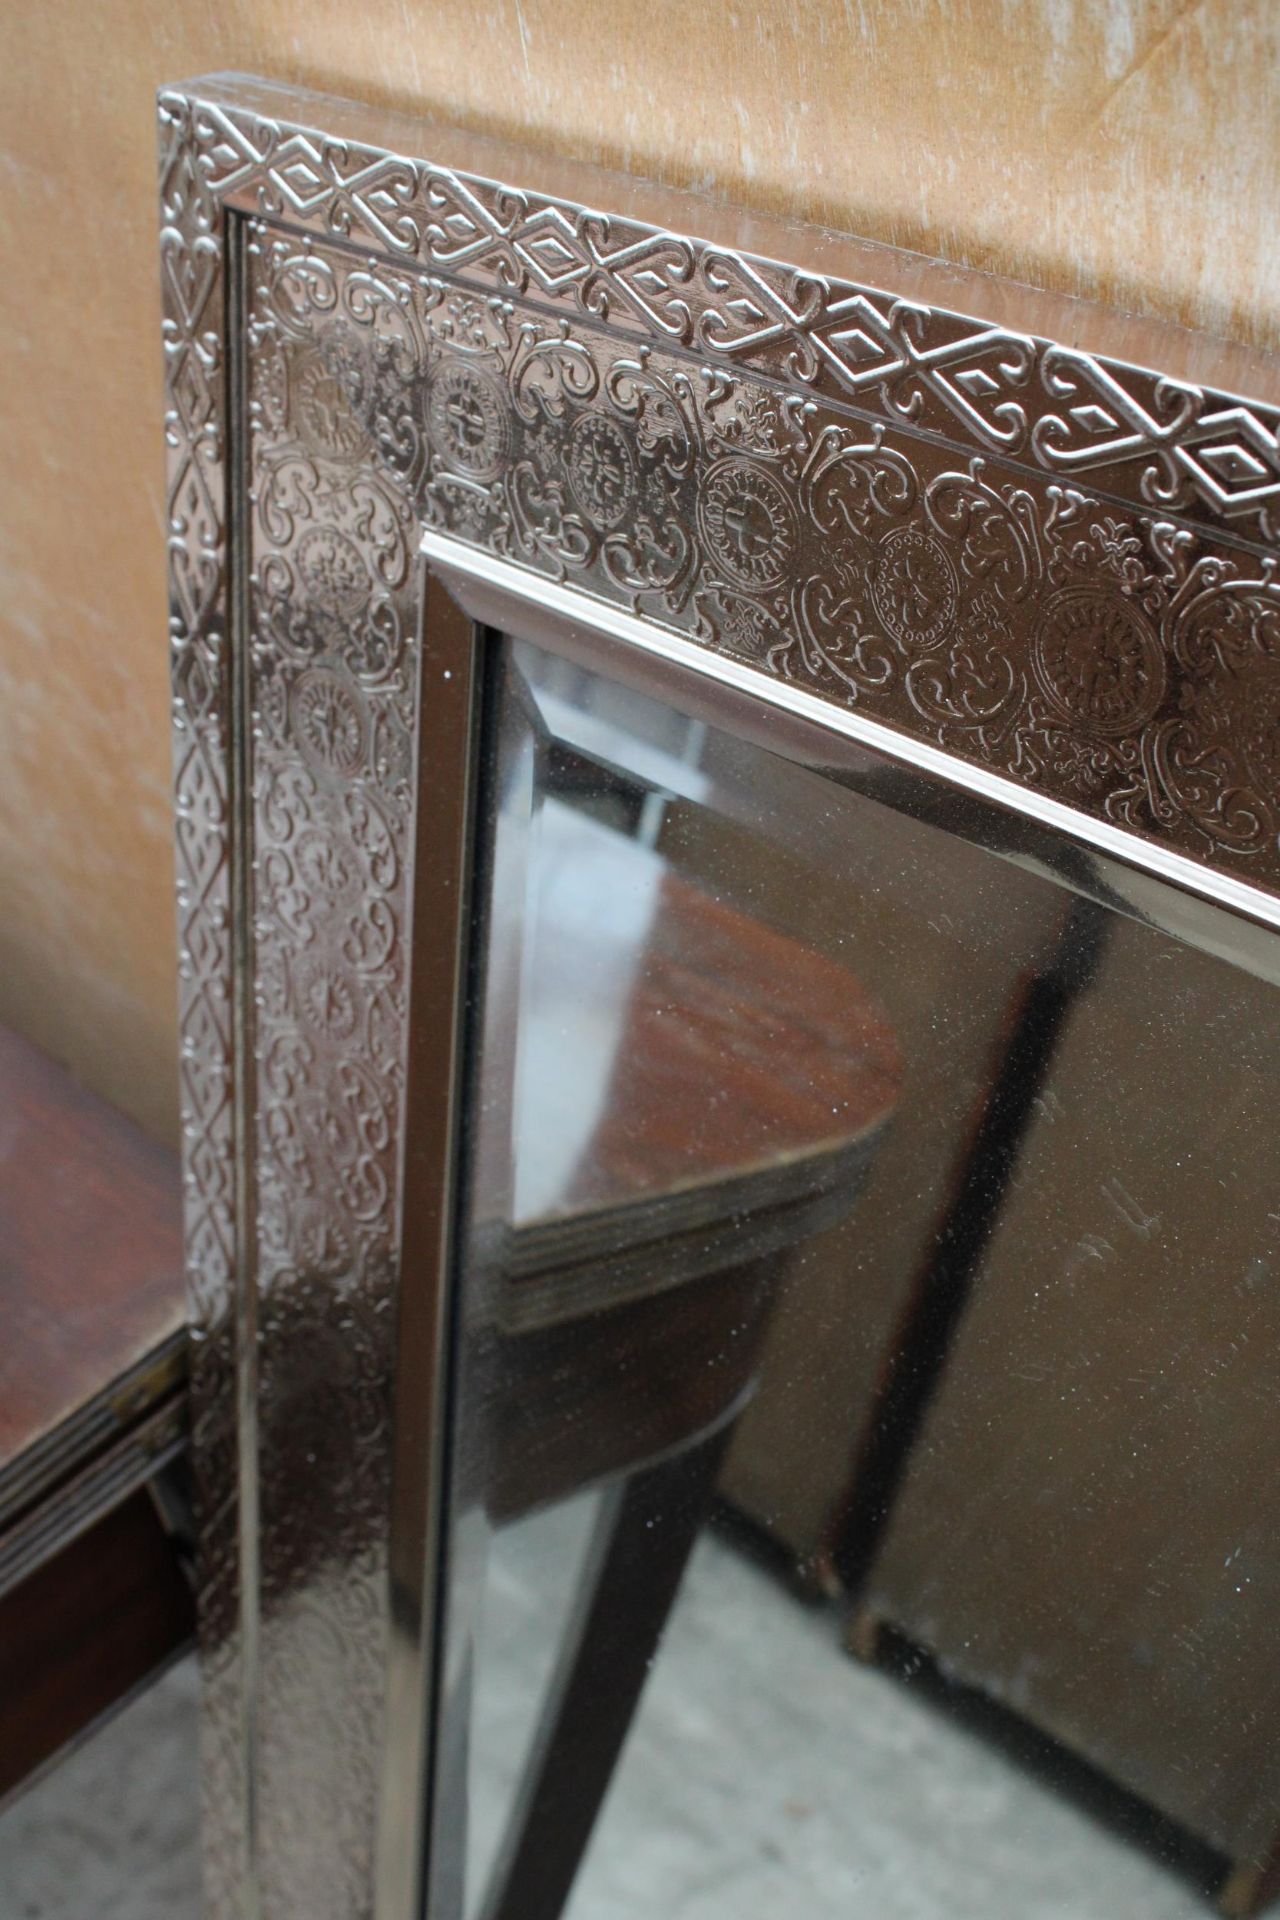 5A SILVER EFFECT BEVEL EDGE MIRROR 44" X 31" - Image 3 of 3